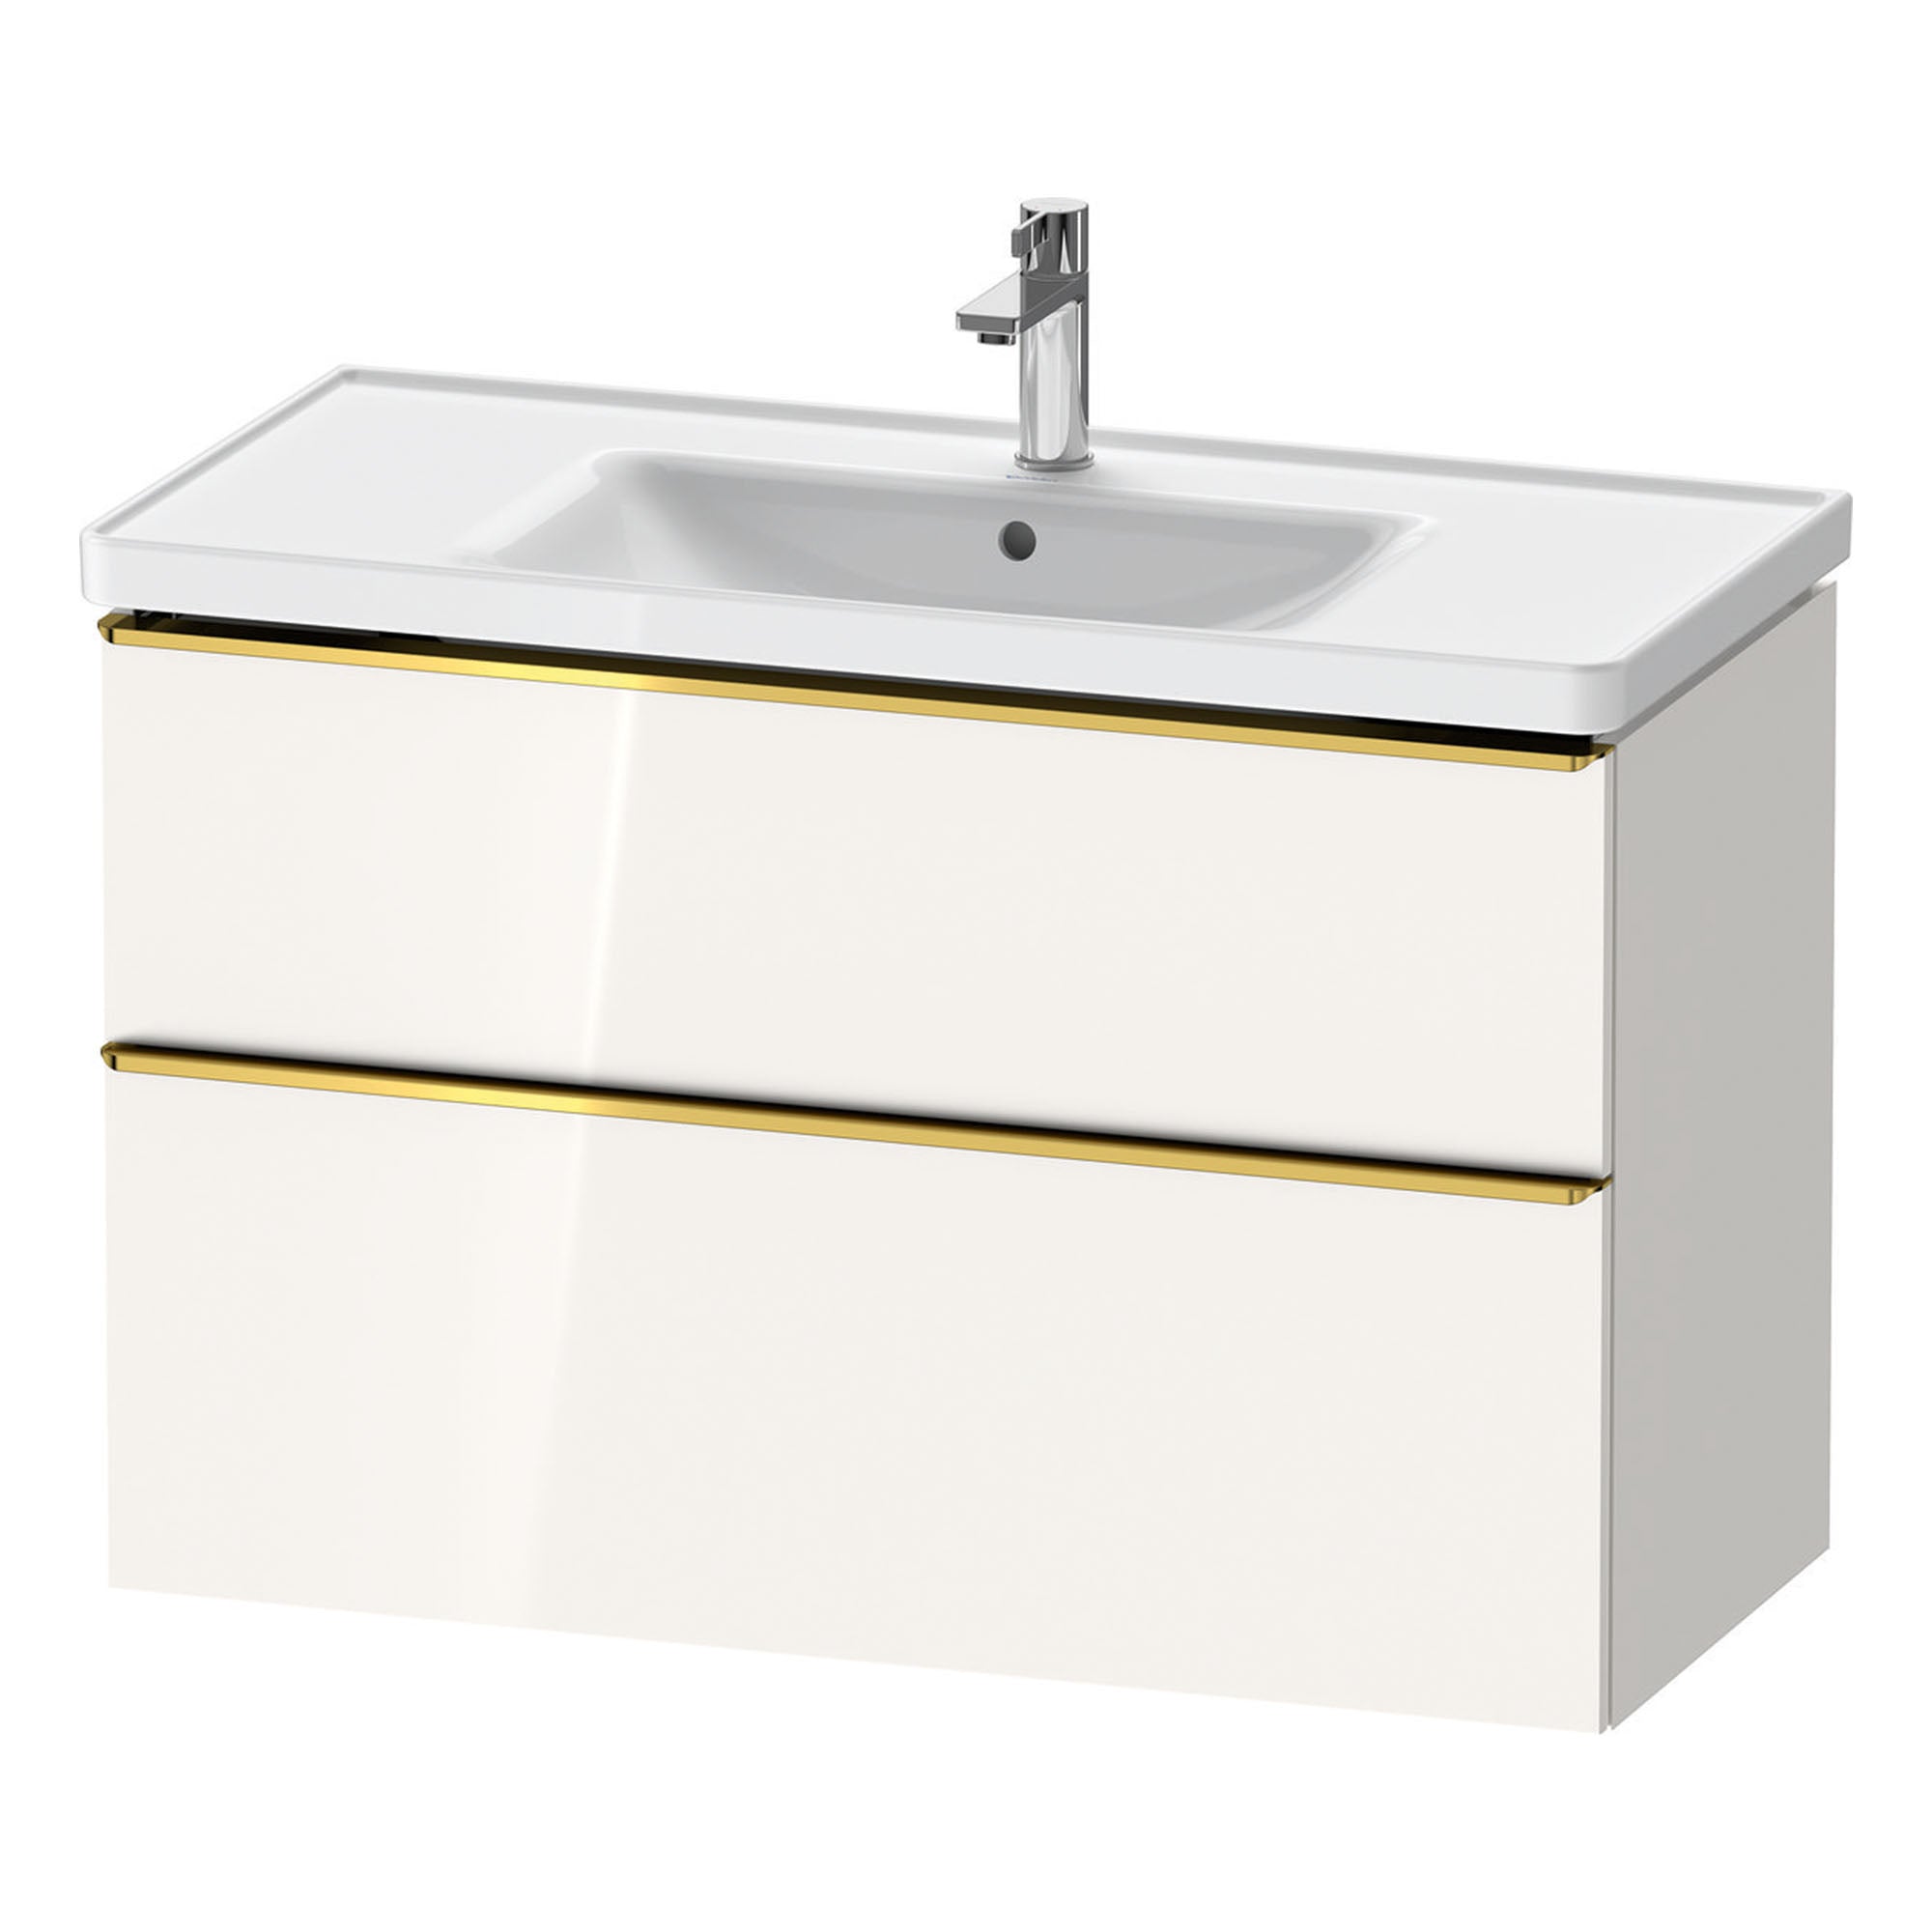 duravit d-neo 1000mm wall mounted vanity unit with d-neo basin gloss white gold handles